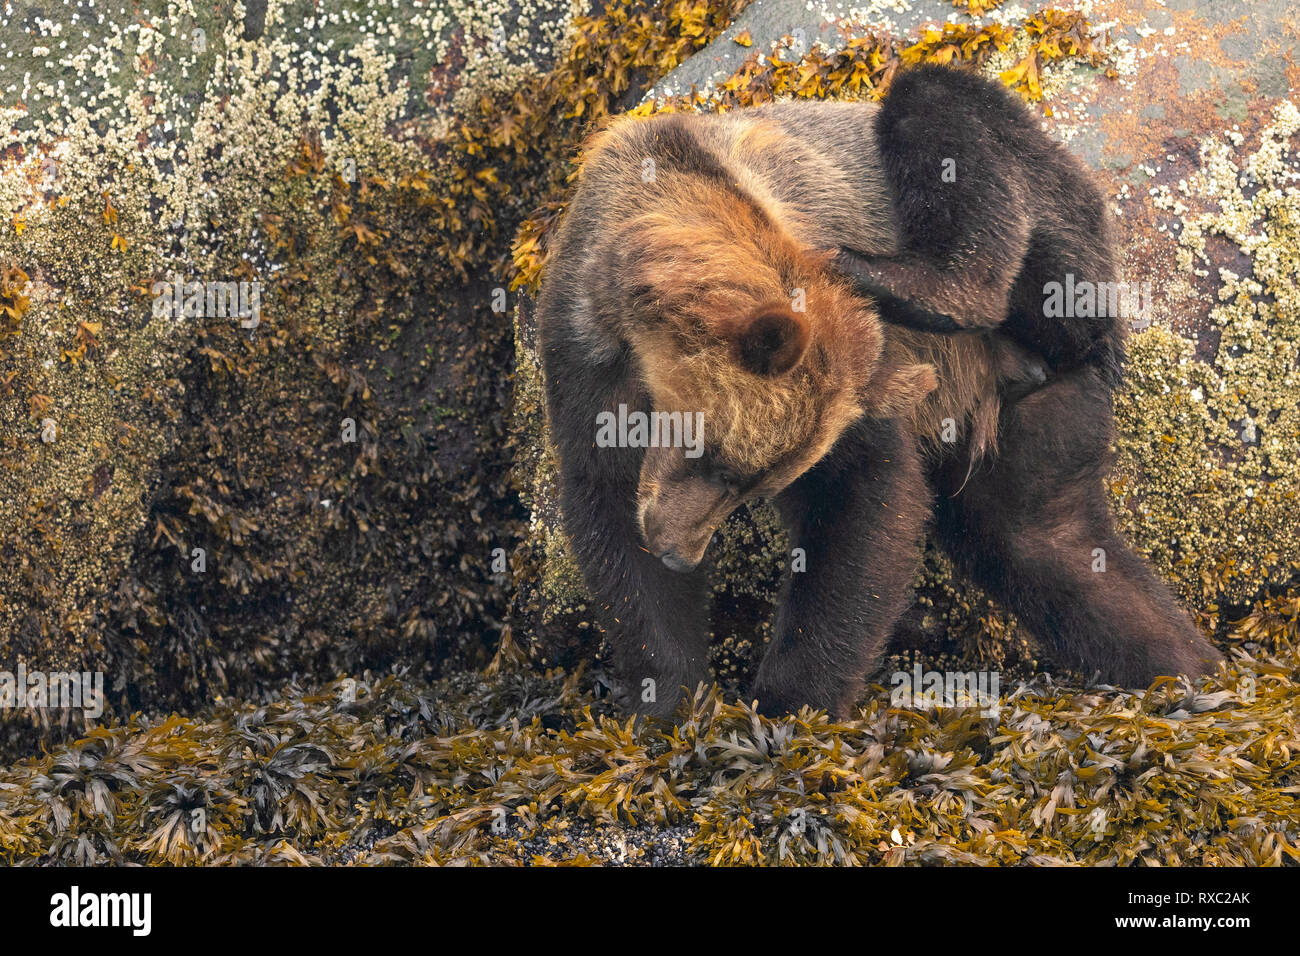 Grizzly bear yoga. Grizzly bear scratching itself with its hind legs along the low tideline in Knight Inlet, First Nations Territory, British Columbia, Canada Stock Photo